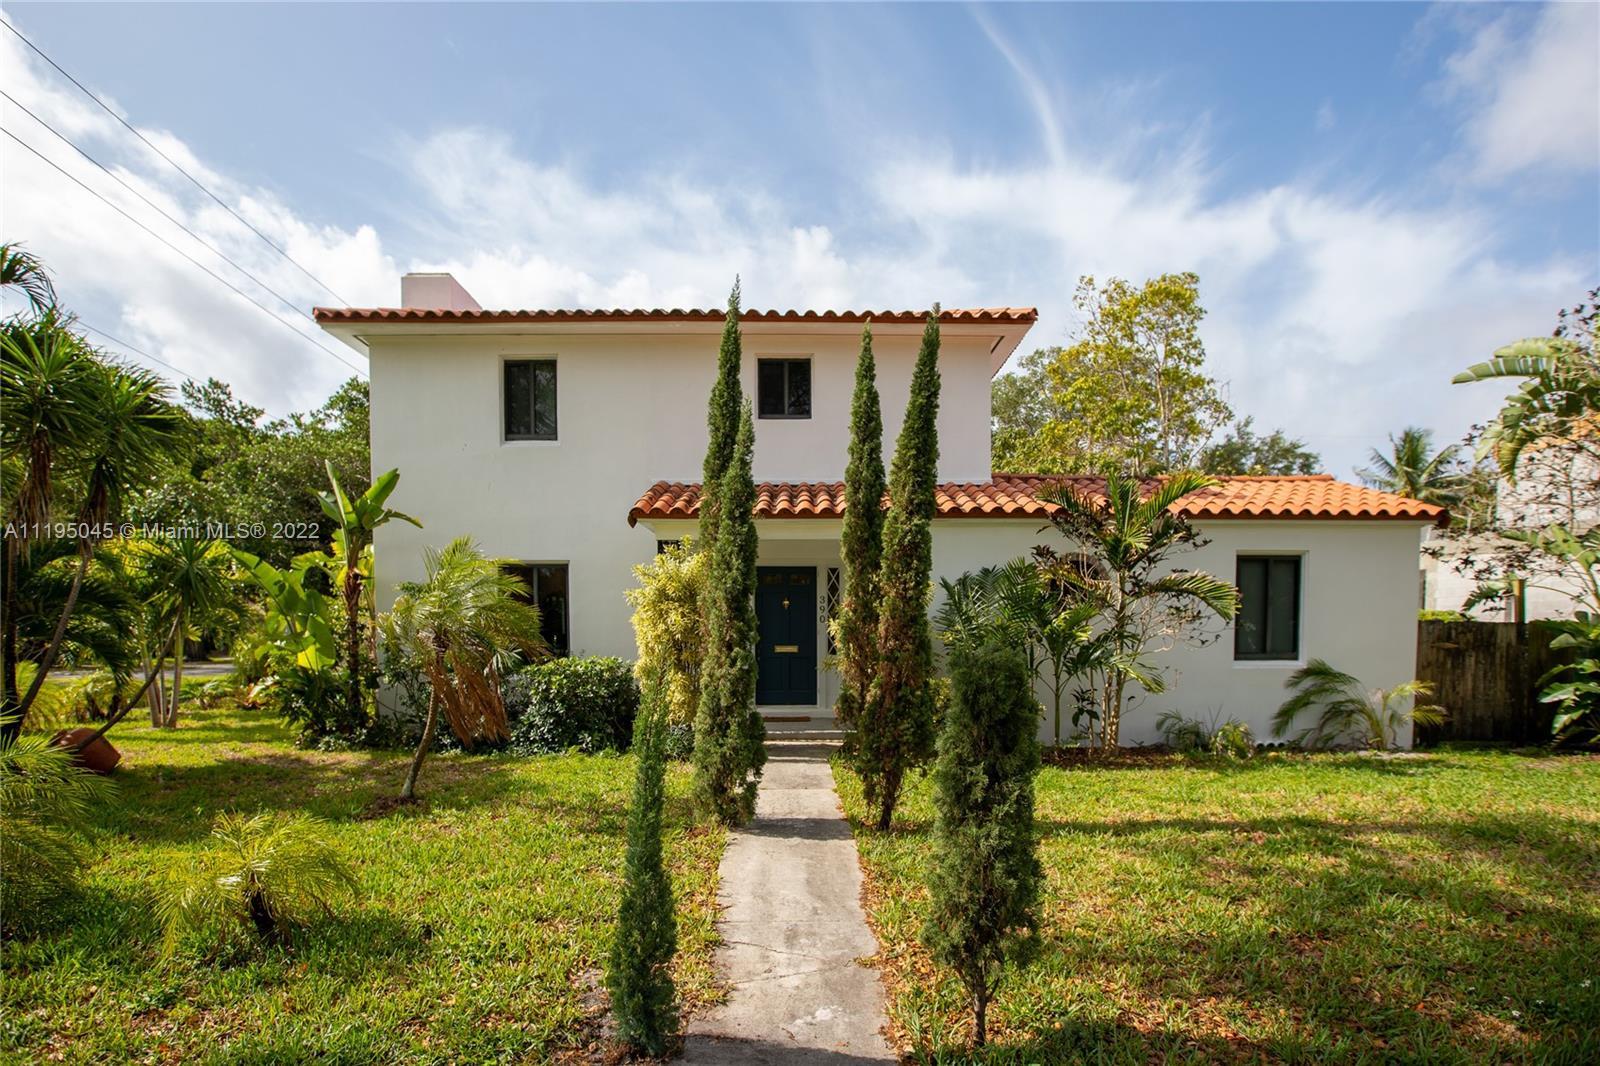 SUPER CHARMING AND RENOVATED TWO STORY 1939 MIAMI SHORES HOME BY ARCHITECT ROBERT LAW WEED. AMAZING 